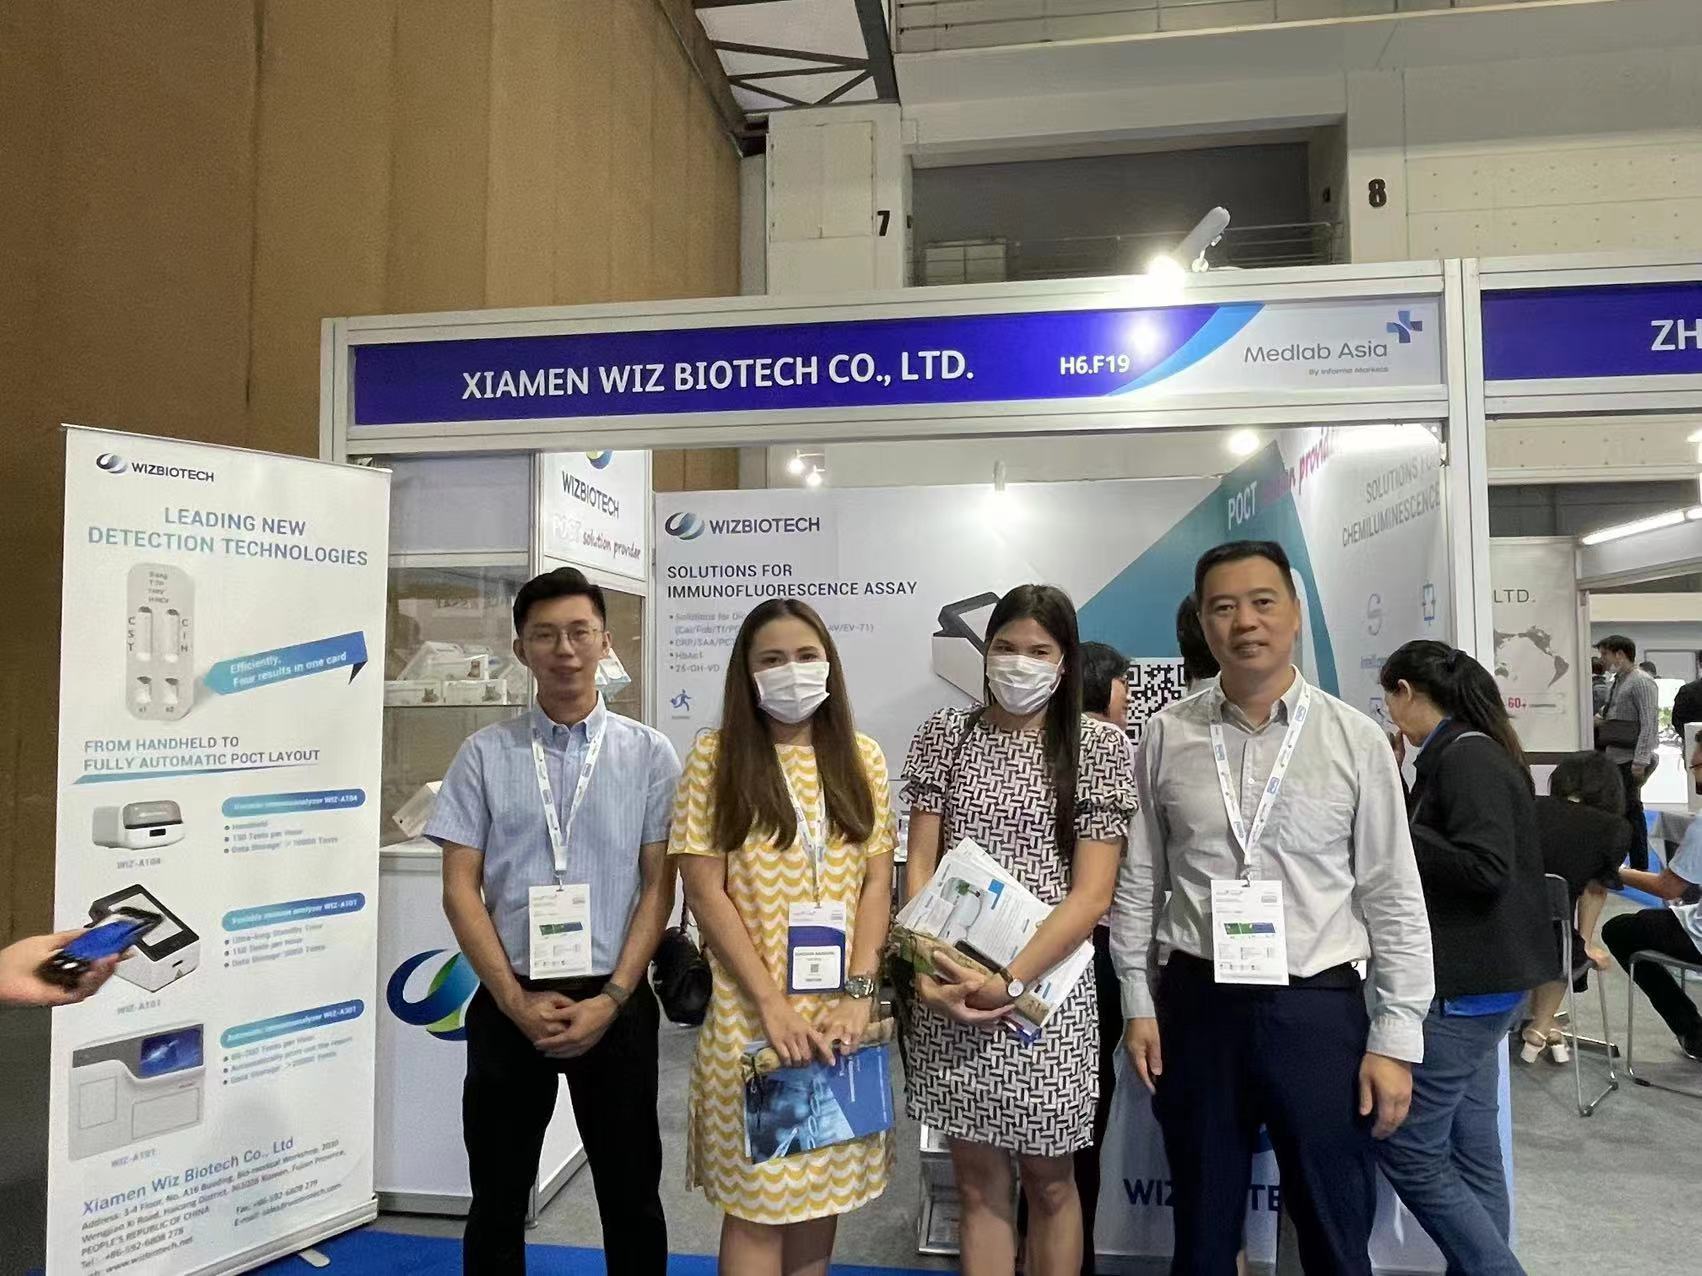 Medlab Asia Exhibition Review